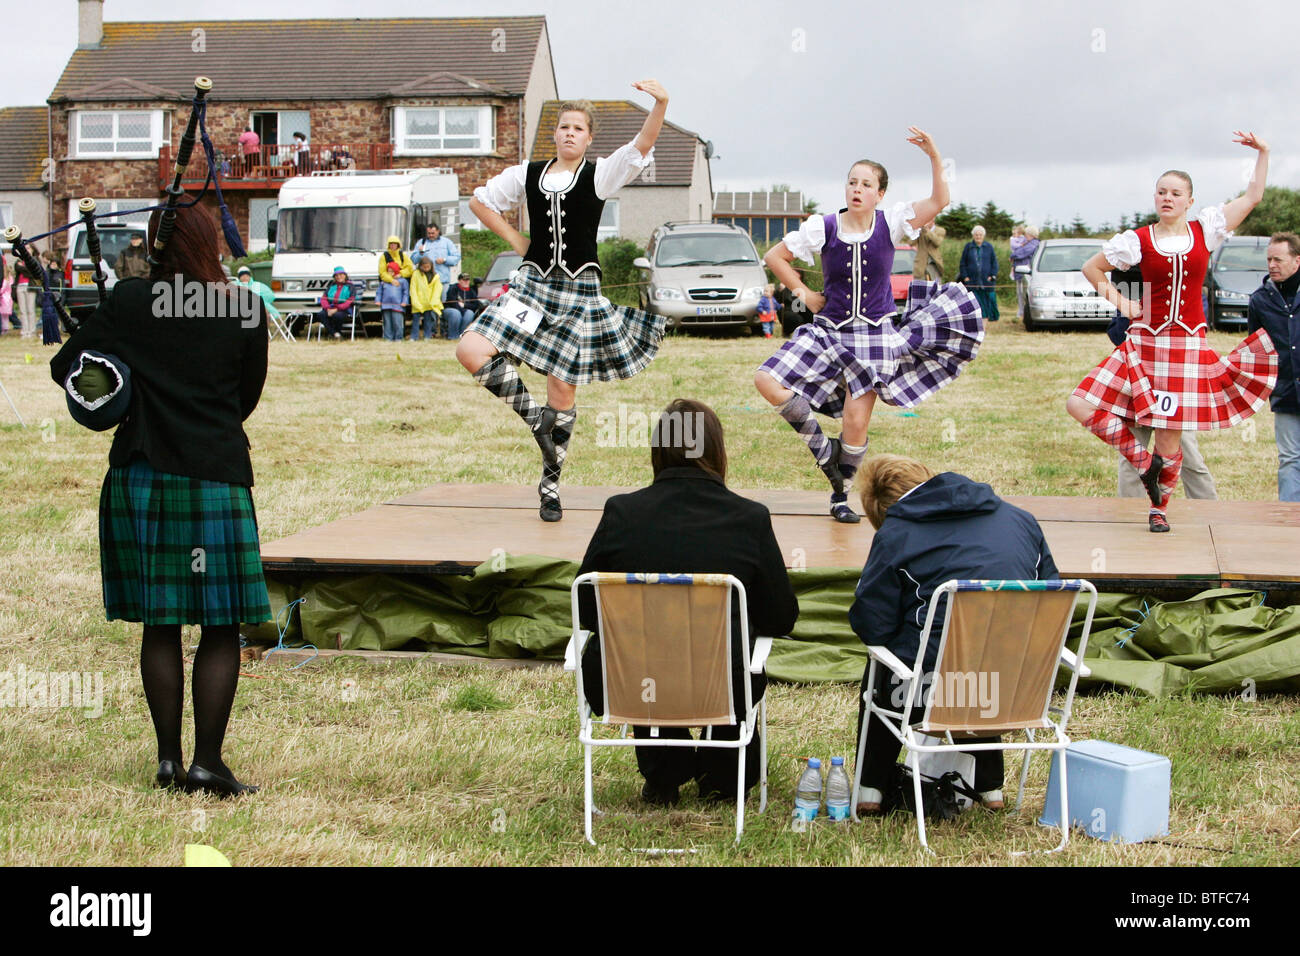 Highland dancers taking part in the Highland Mey Games in Caithness, SCOTLAND. Stock Photo